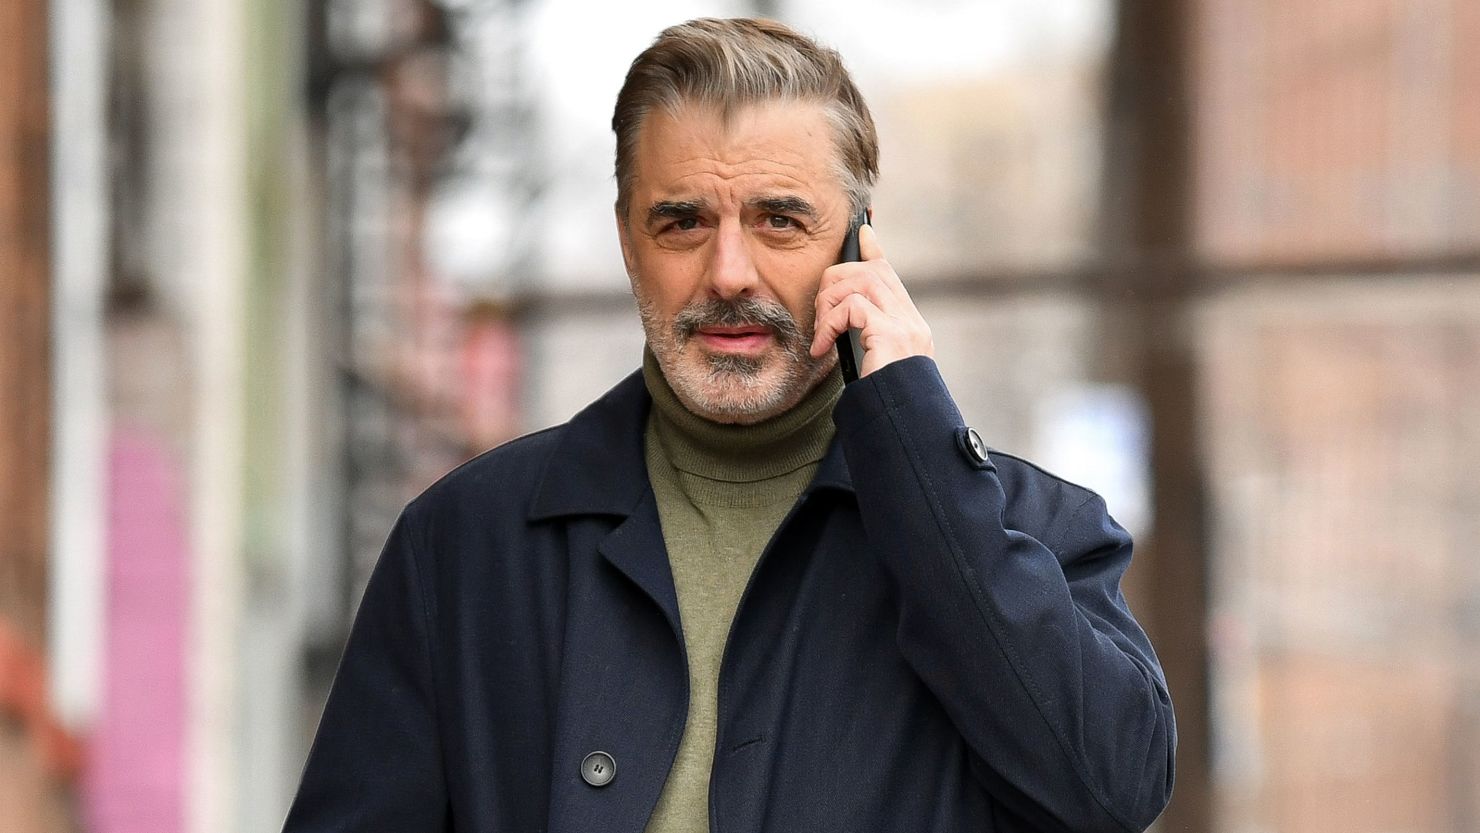 Chris Noth seen on the set of "The Equalizer" on February 5, 2021 in Patterson, New Jersey. 